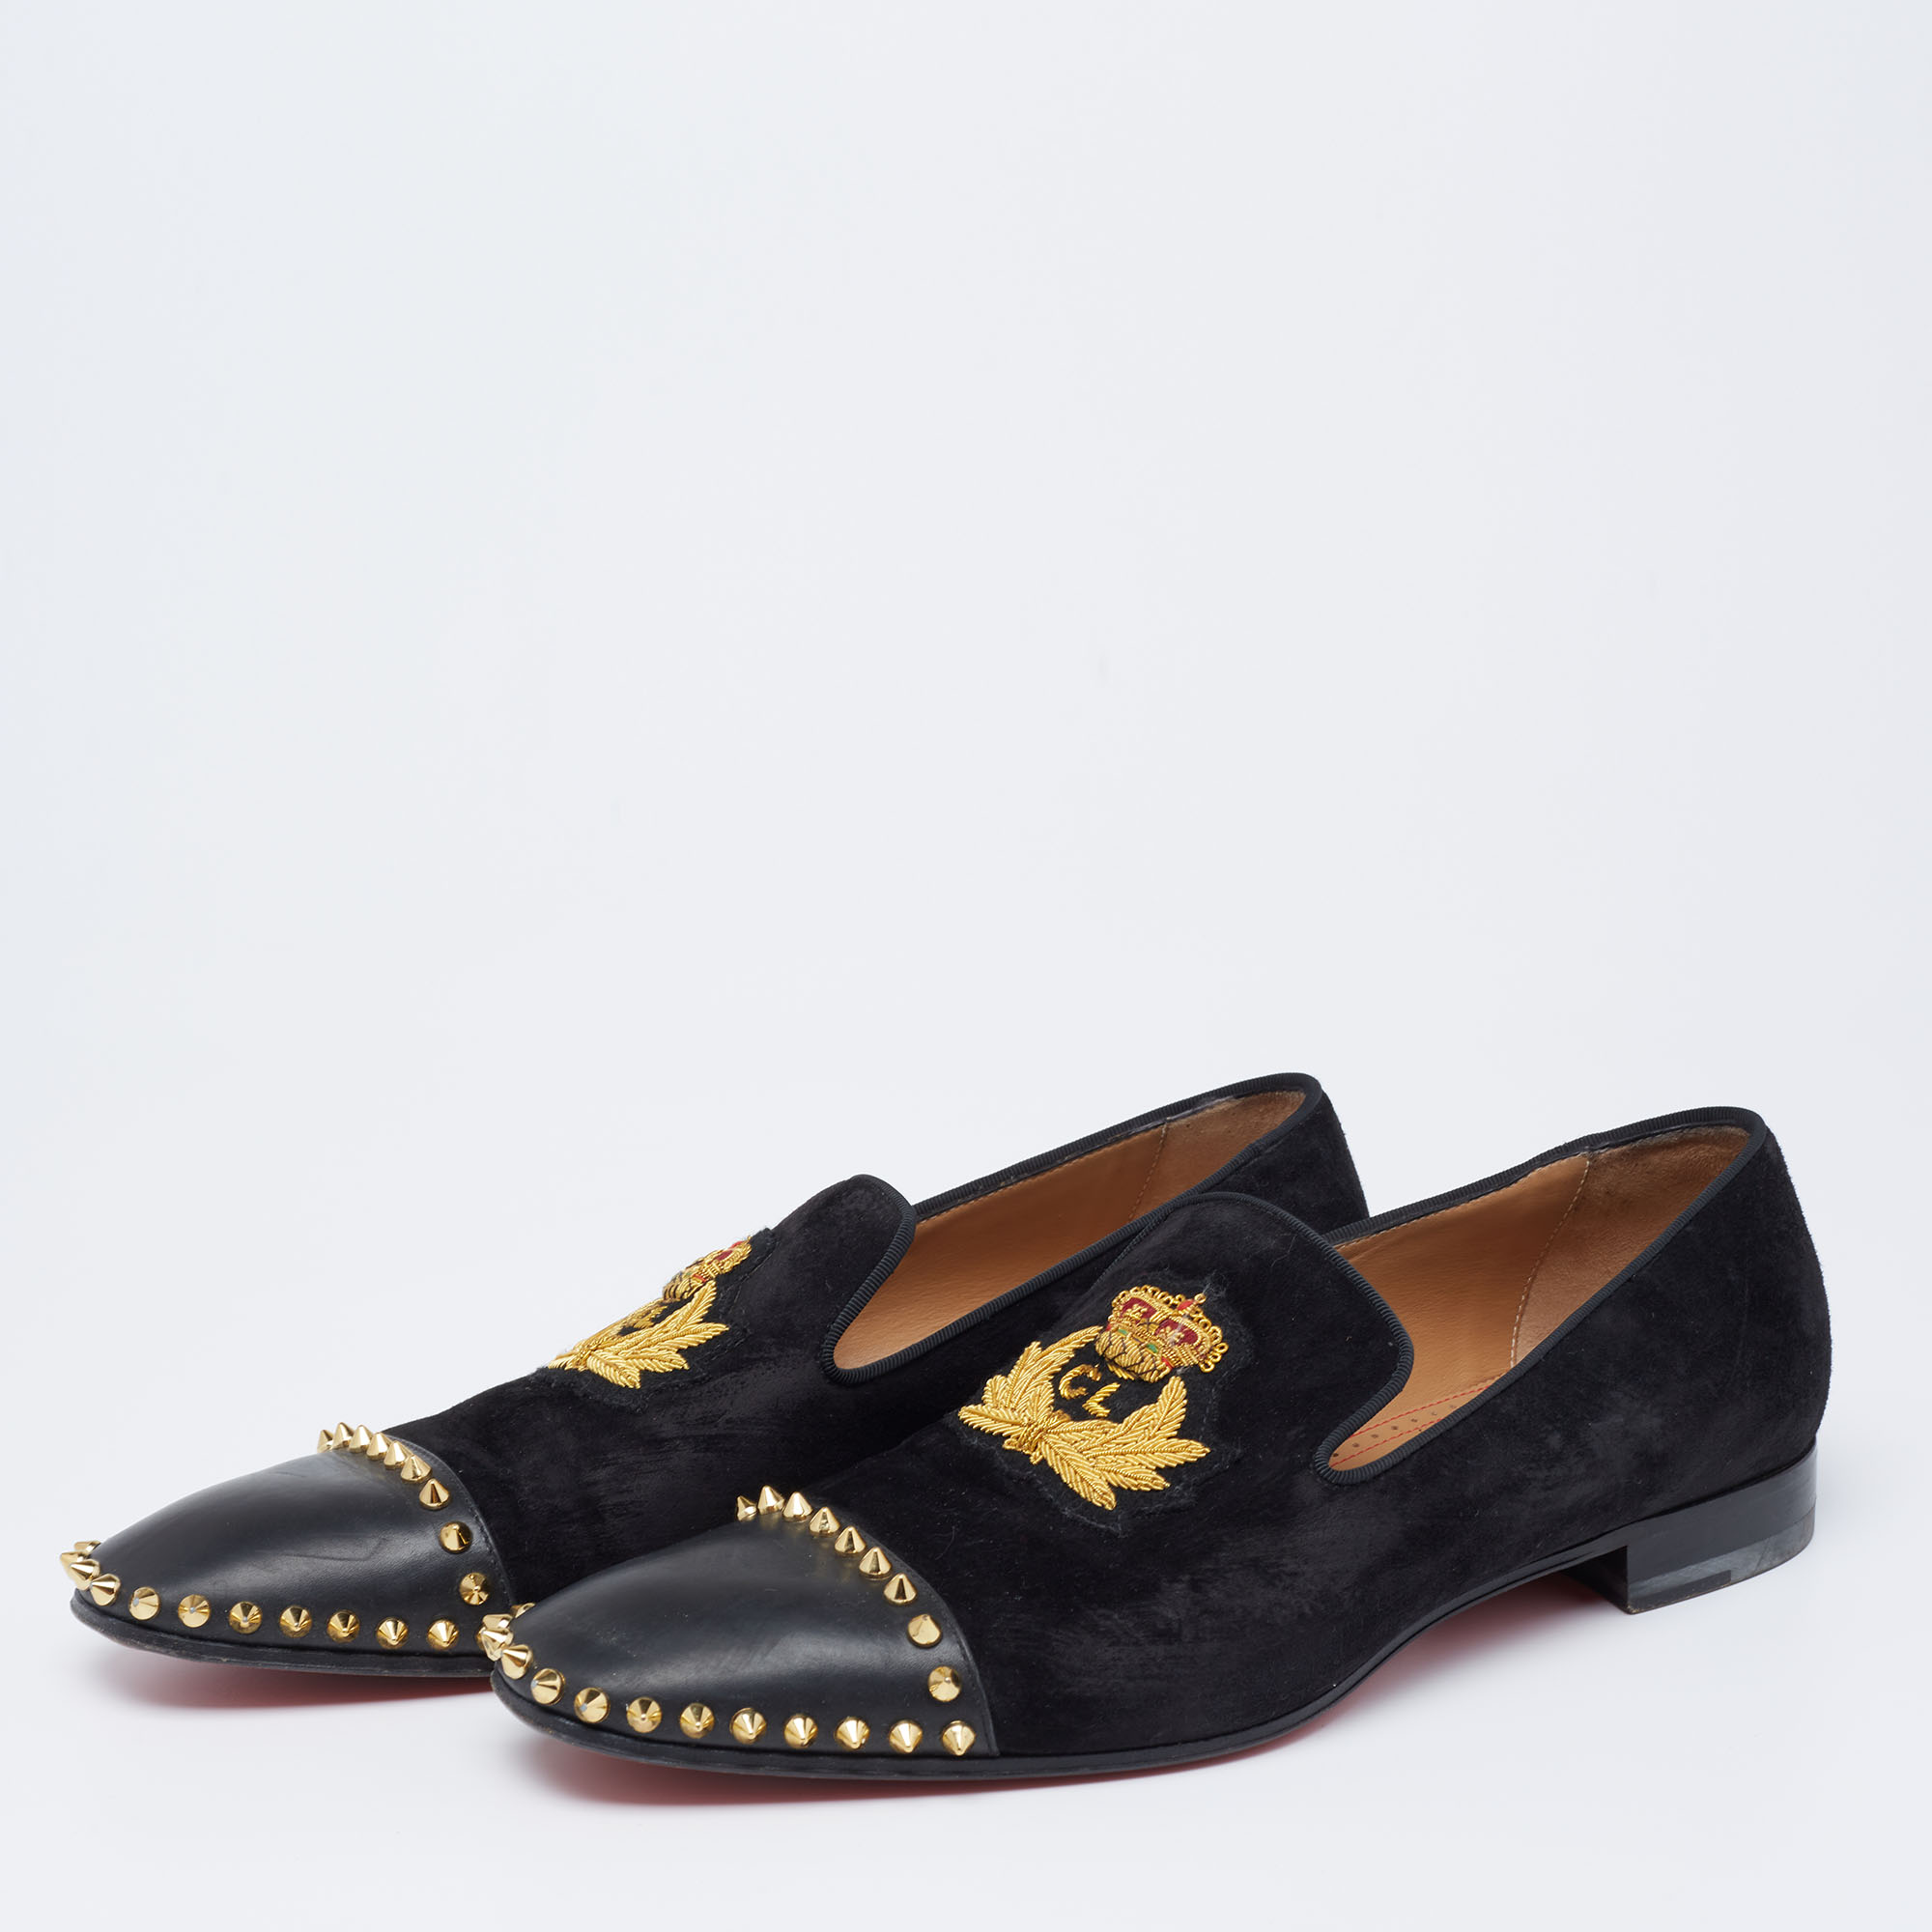 

Christian Louboutin Black Suede and Leather Captain Loubi Spiked Smoking Slippers Size